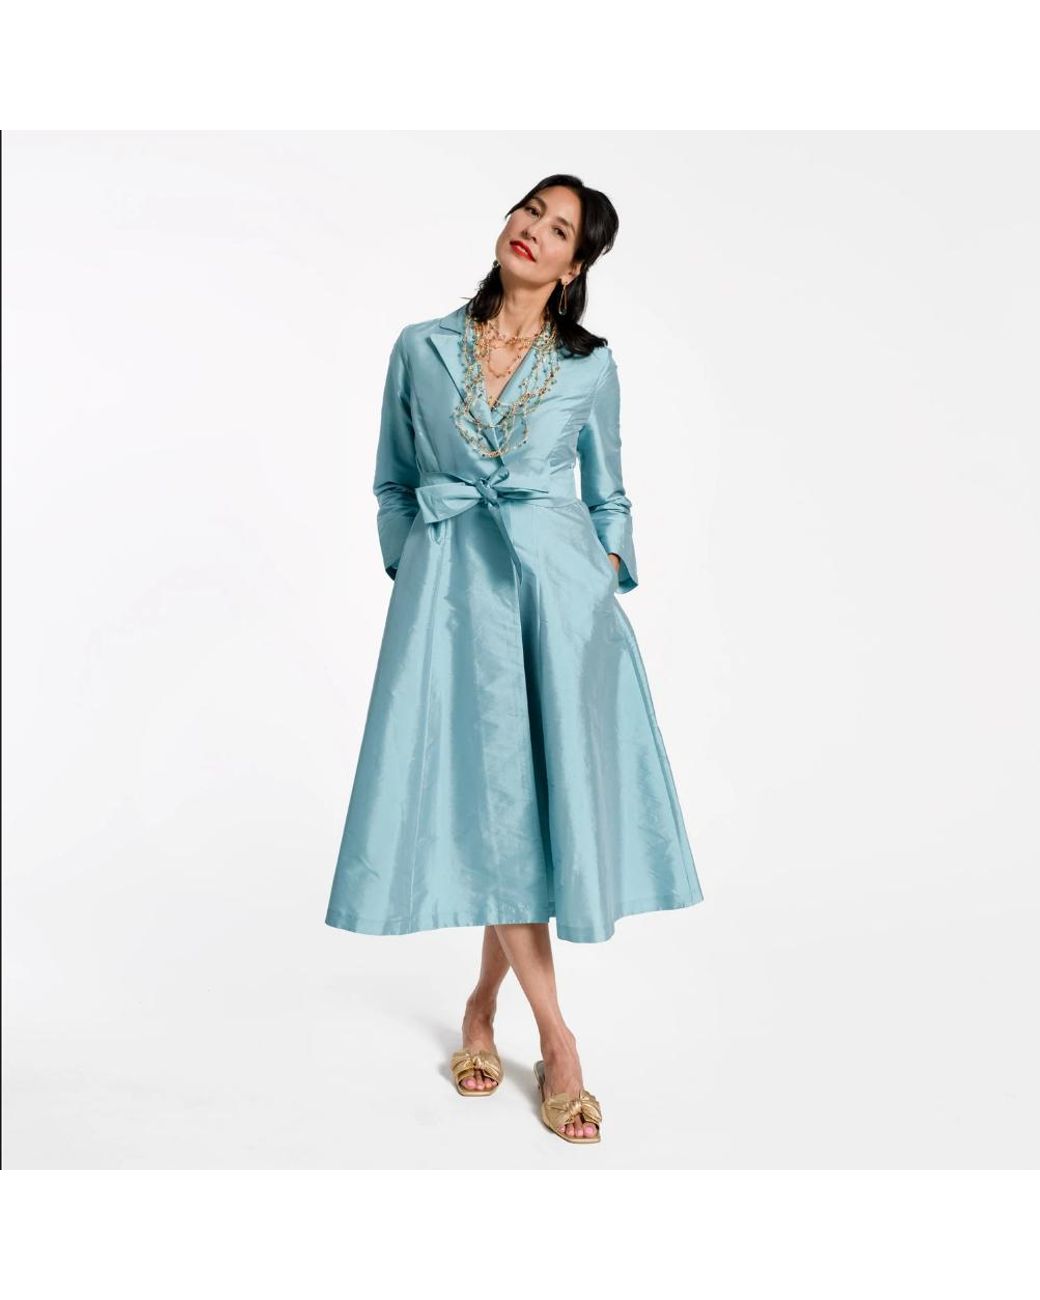 Frances Valentine Lucille Wrap Dress in Turquoise (Blue) | Lyst